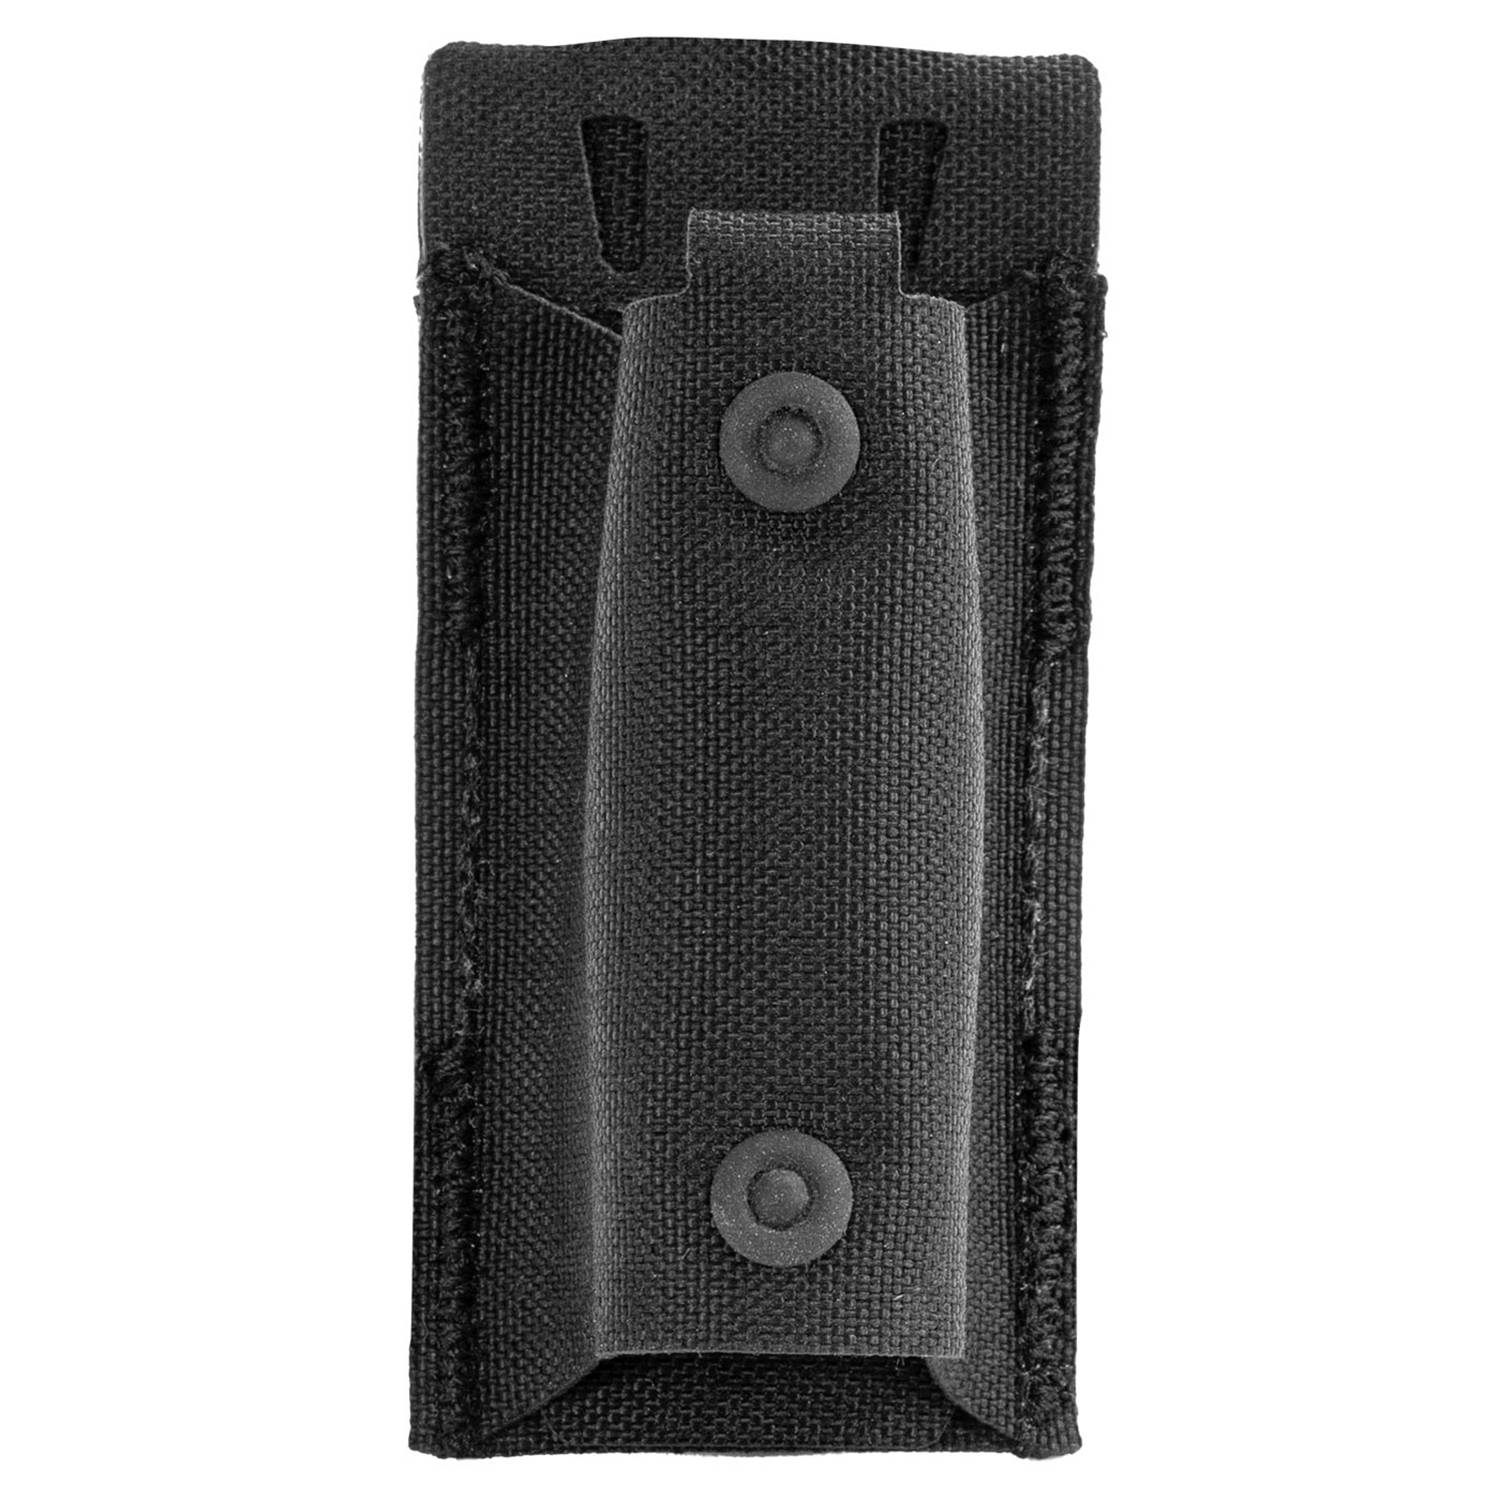 POINT BLANK LARGE FLASHLIGHT POUCH